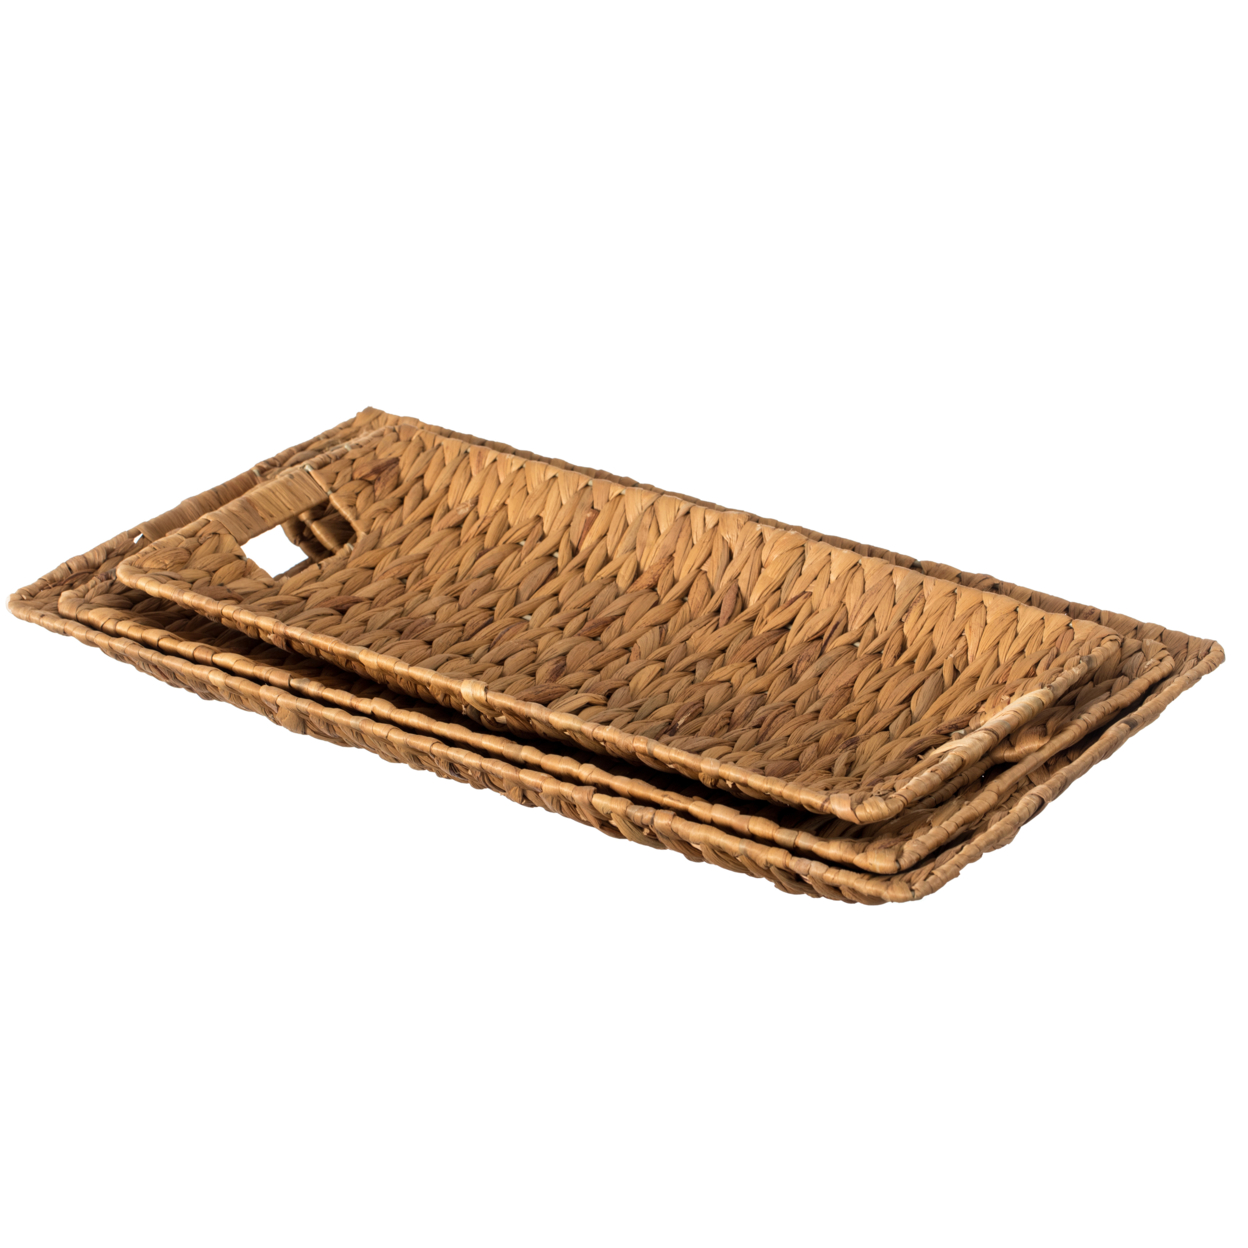 Natural Decorative Rectangular Hand-Woven Water Hyacinth Serving Tray With Built-in Handles - Medium